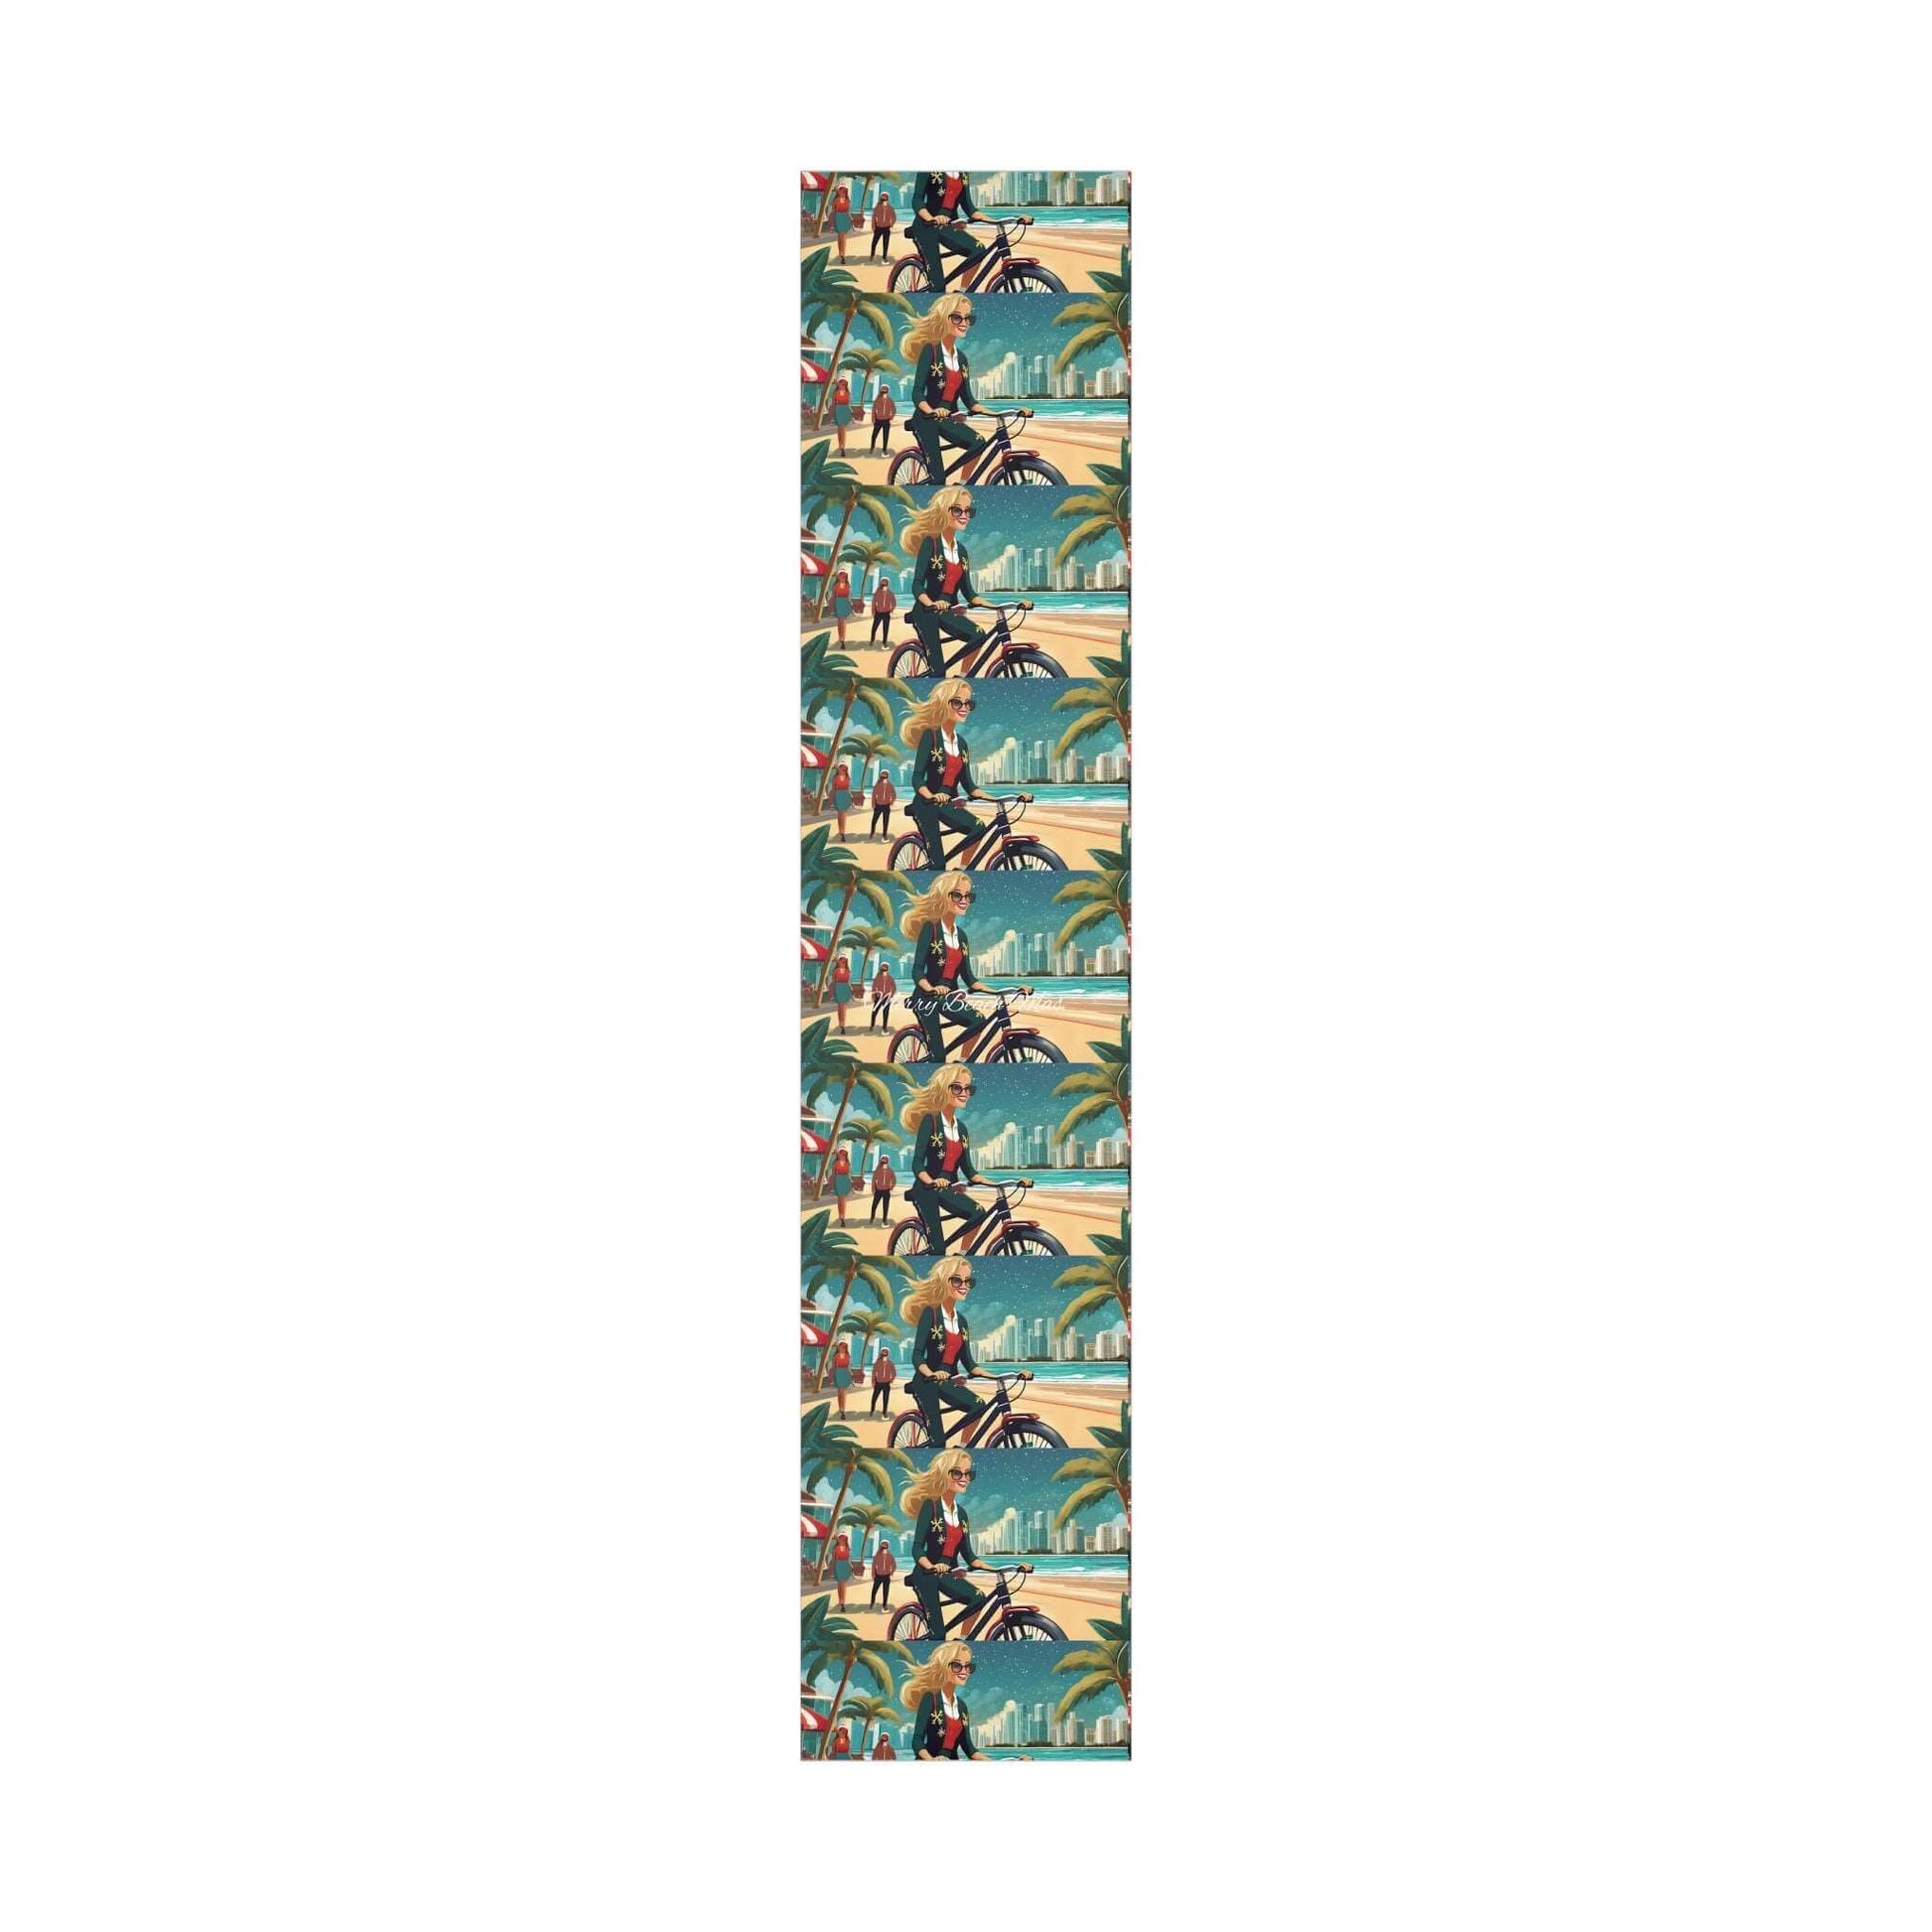 City Girl Ebike Electric Bikebabe Christmas Wrap Papers